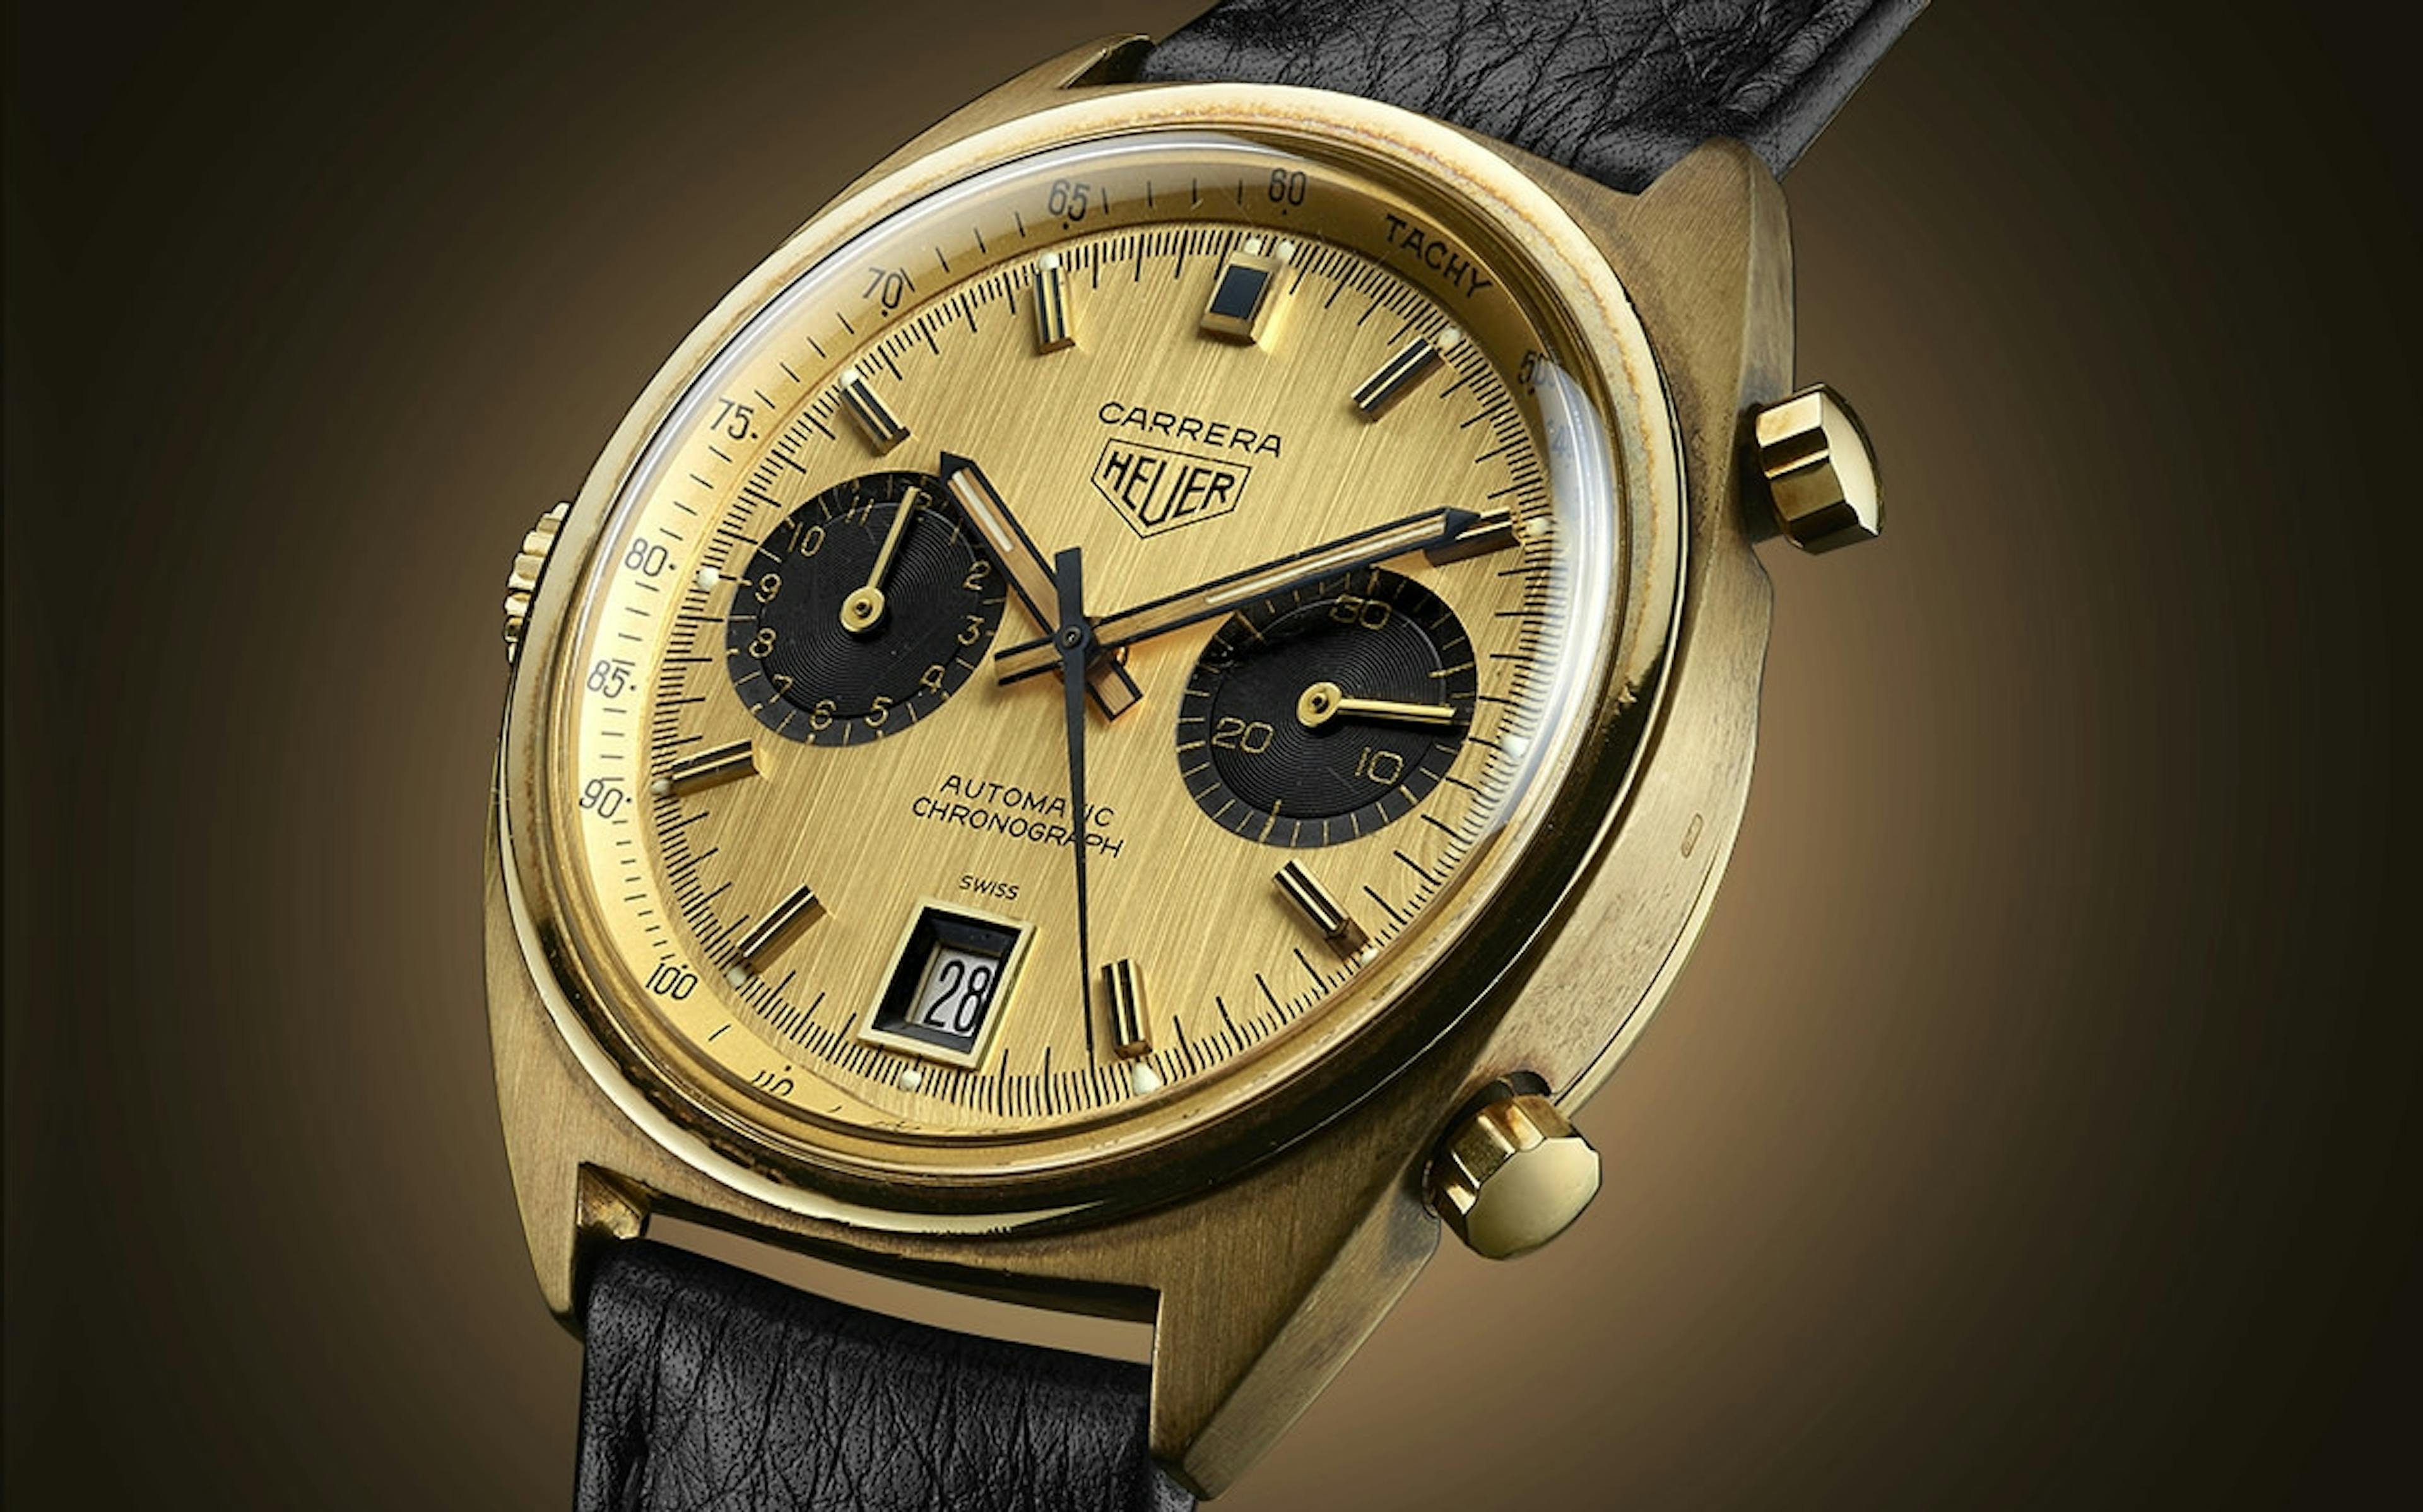 A vintage TAG Heuer Carrera from the 1970s, inspired by the PanAmerica Carrera Rally in Mexico in the 1950s.